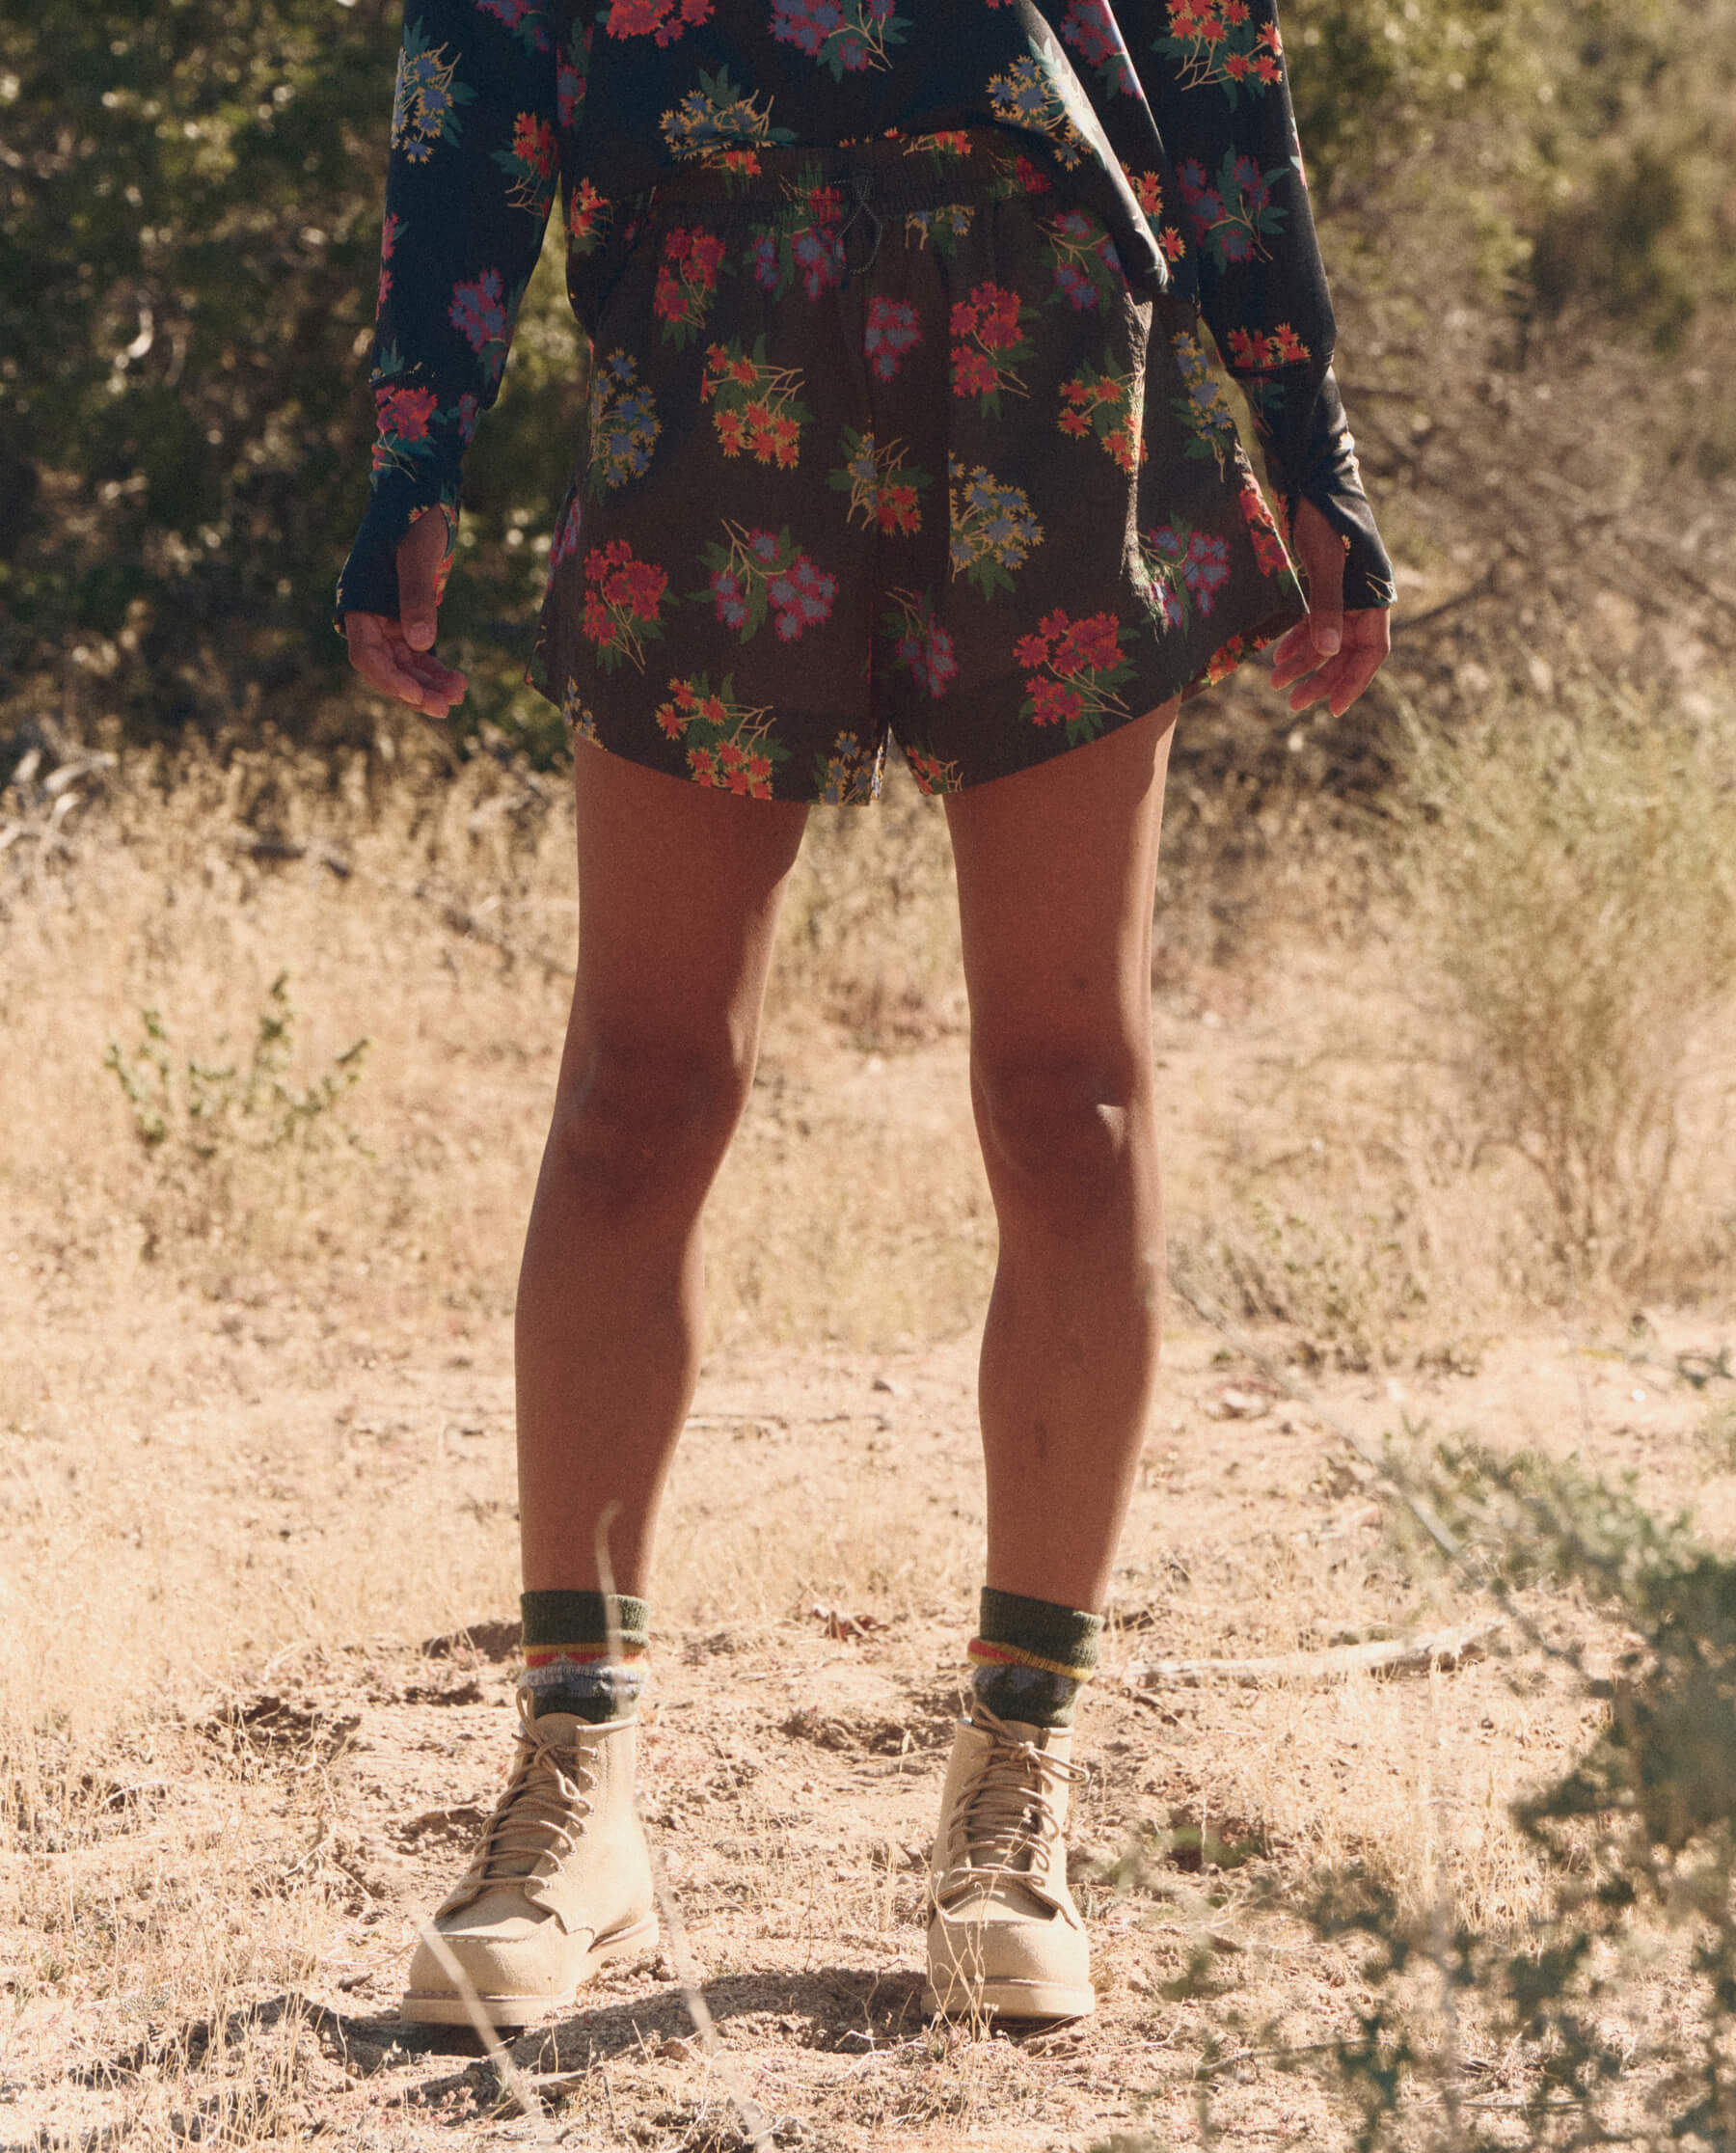 The Rover Short. -- Black Palisade Floral SHORTS THE GREAT. SP24 TGO